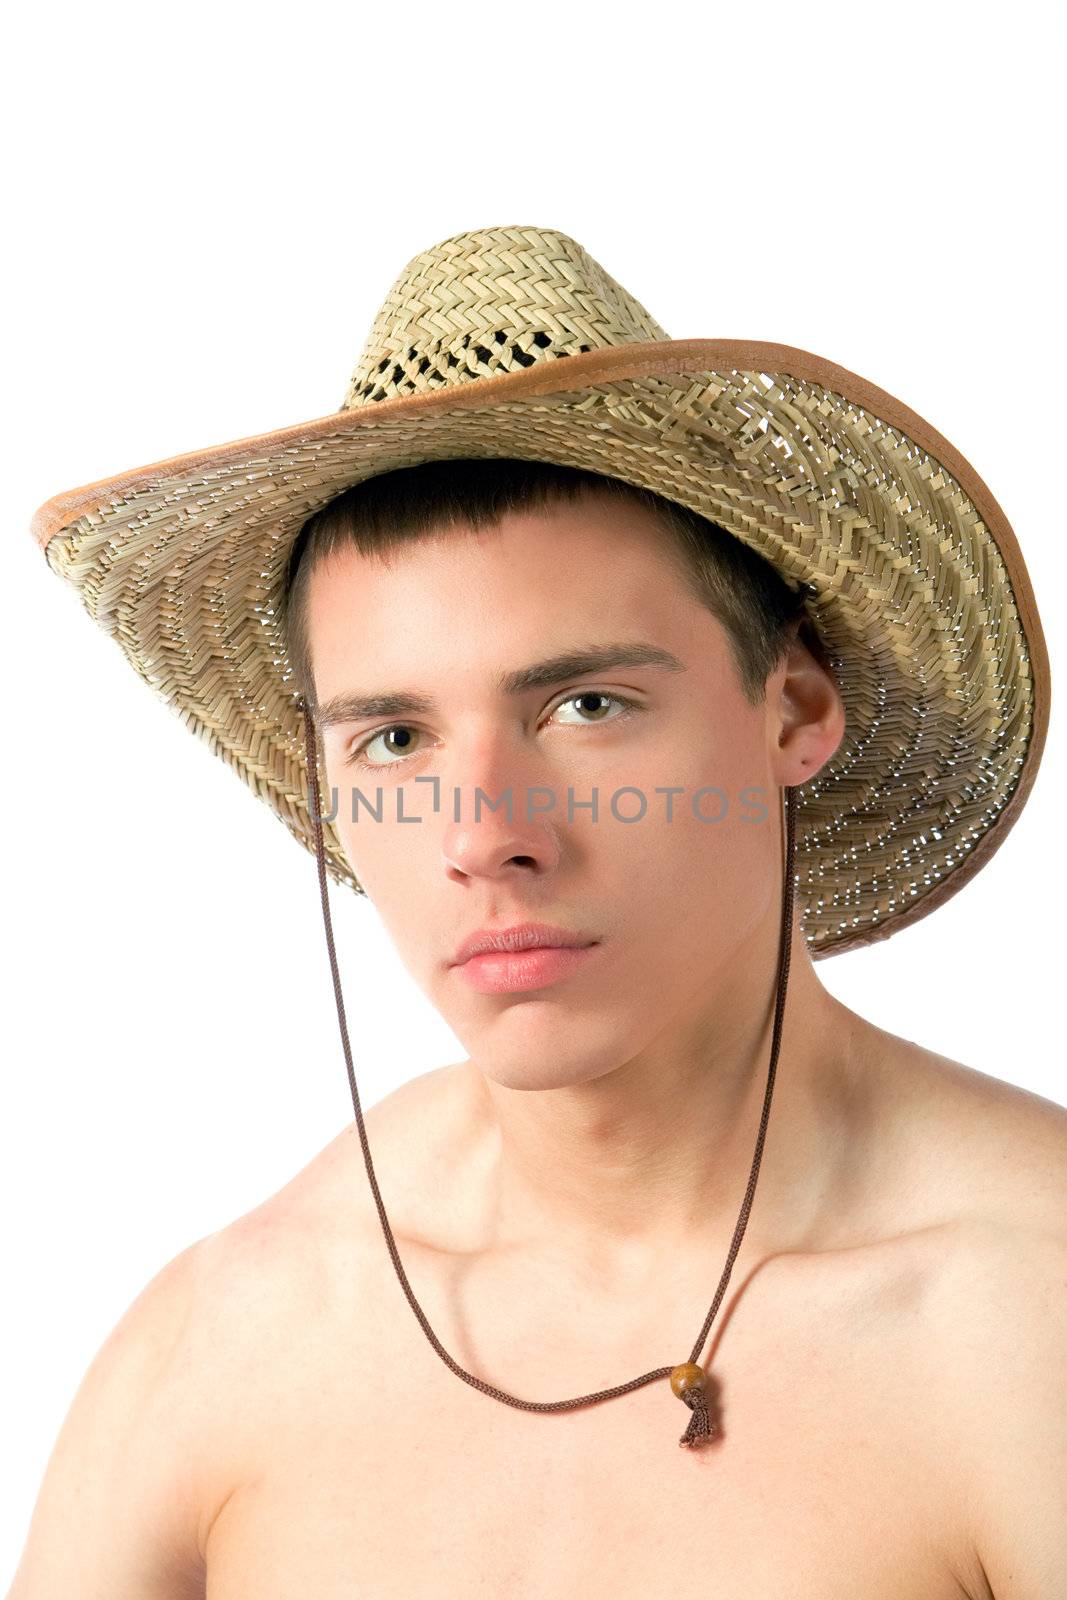 The beautiful young man in a straw hat
